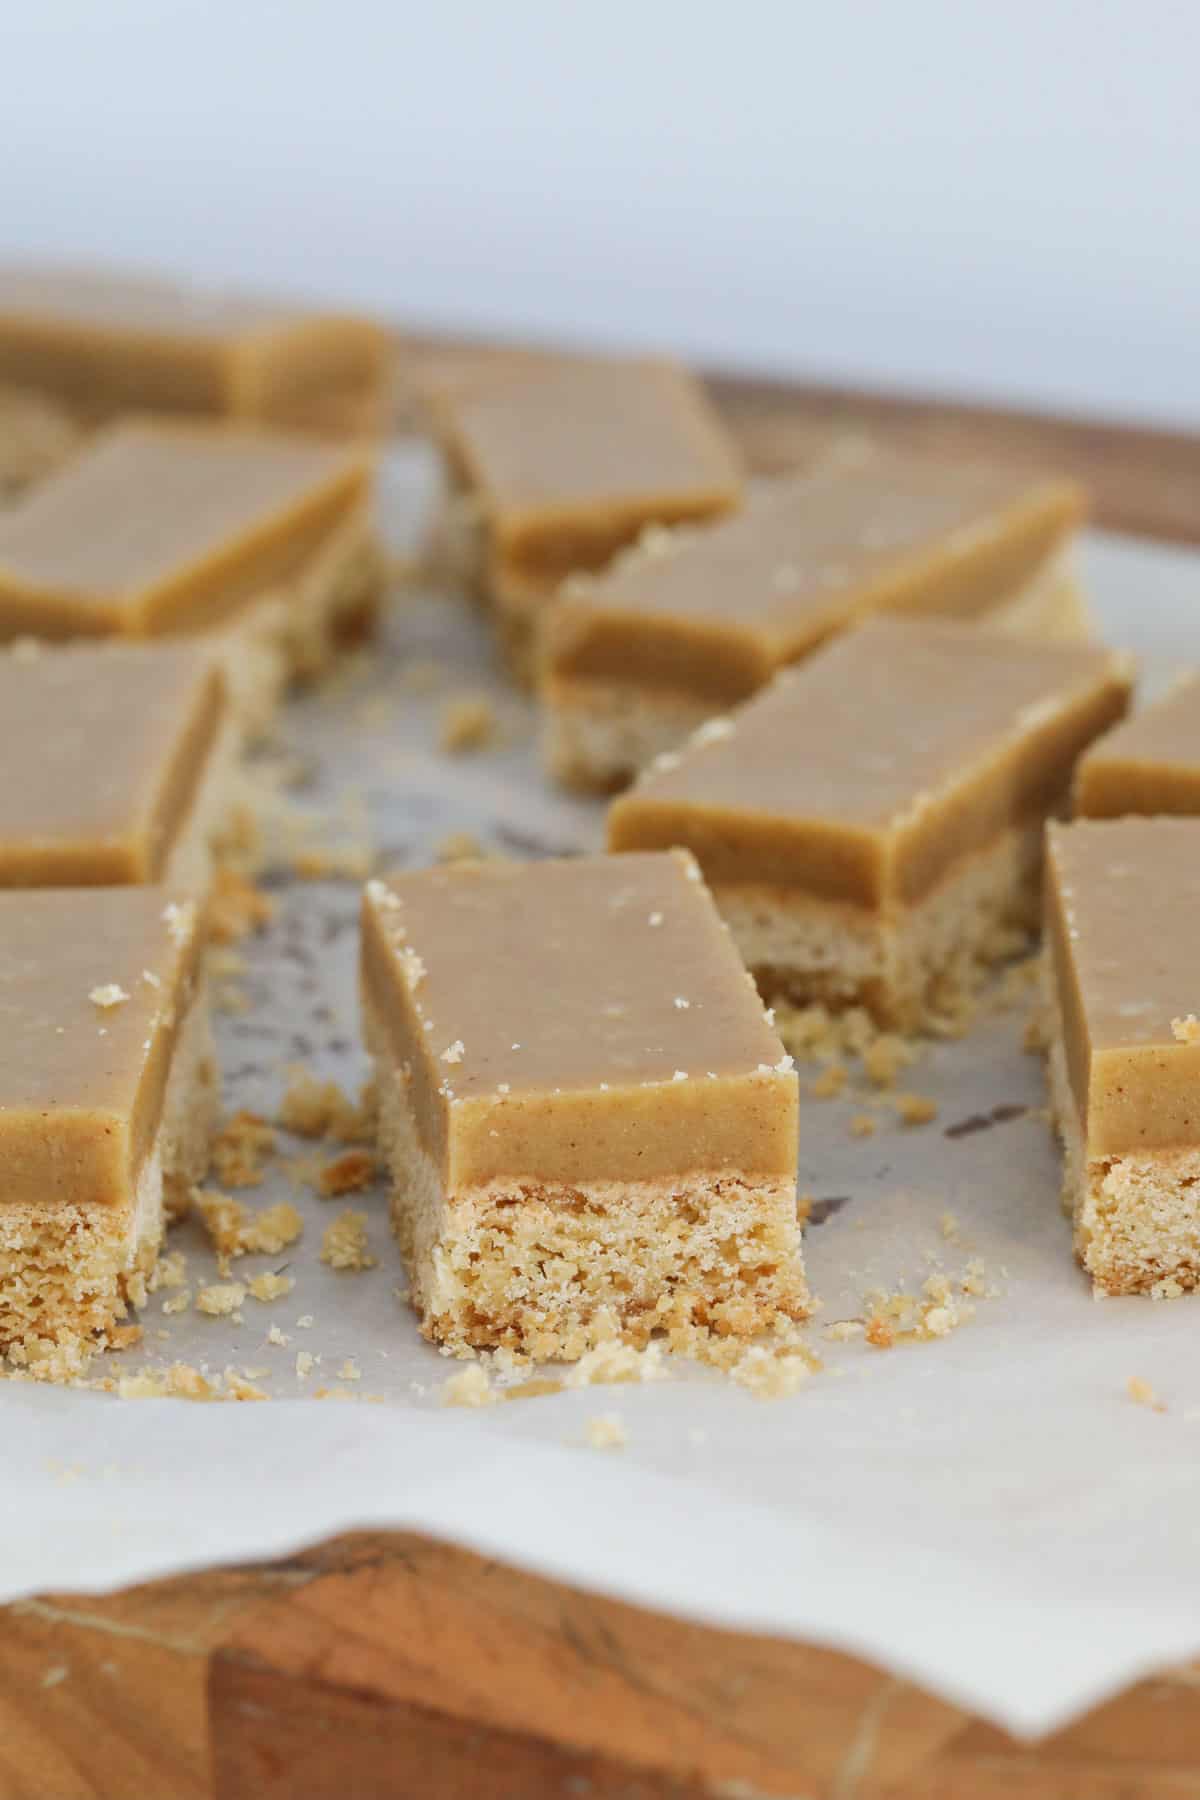 A ginger slice cut into bars.